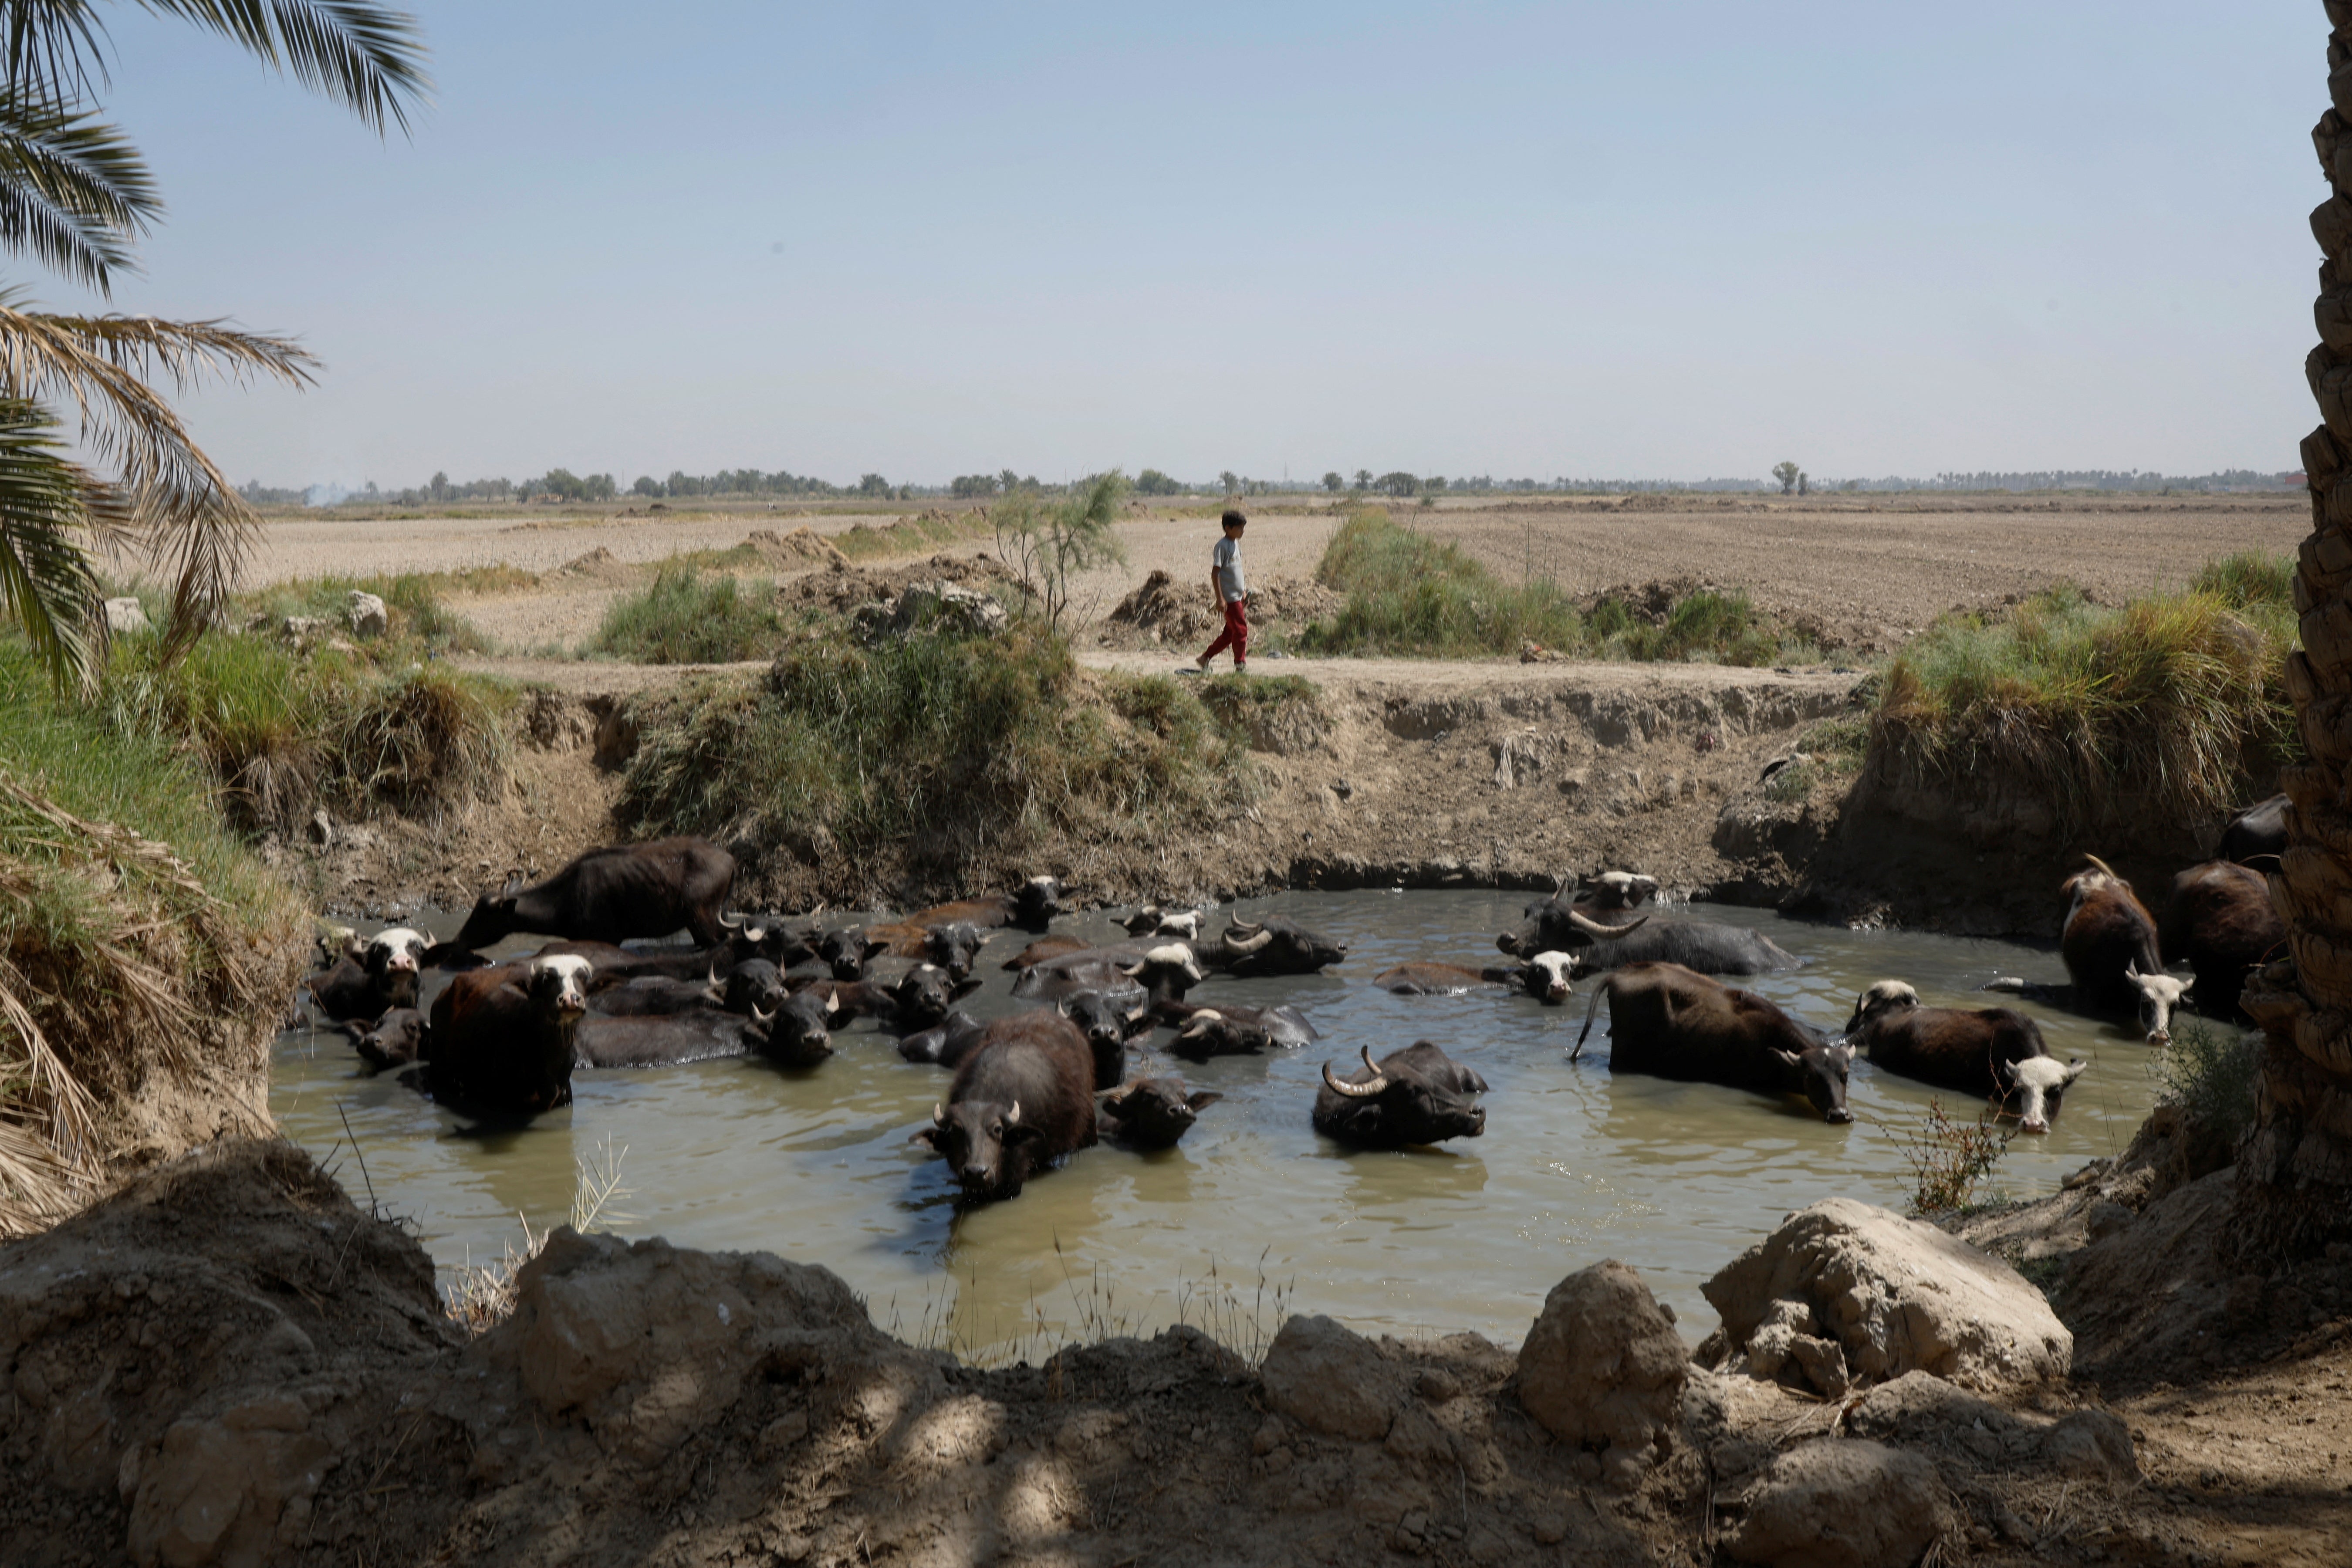 Mustafa Ahmed keeps watch over his family's buffalo herd as they wade at a waterhole in Al-Mishkhab, on the outskirts of Najaf, Iraq